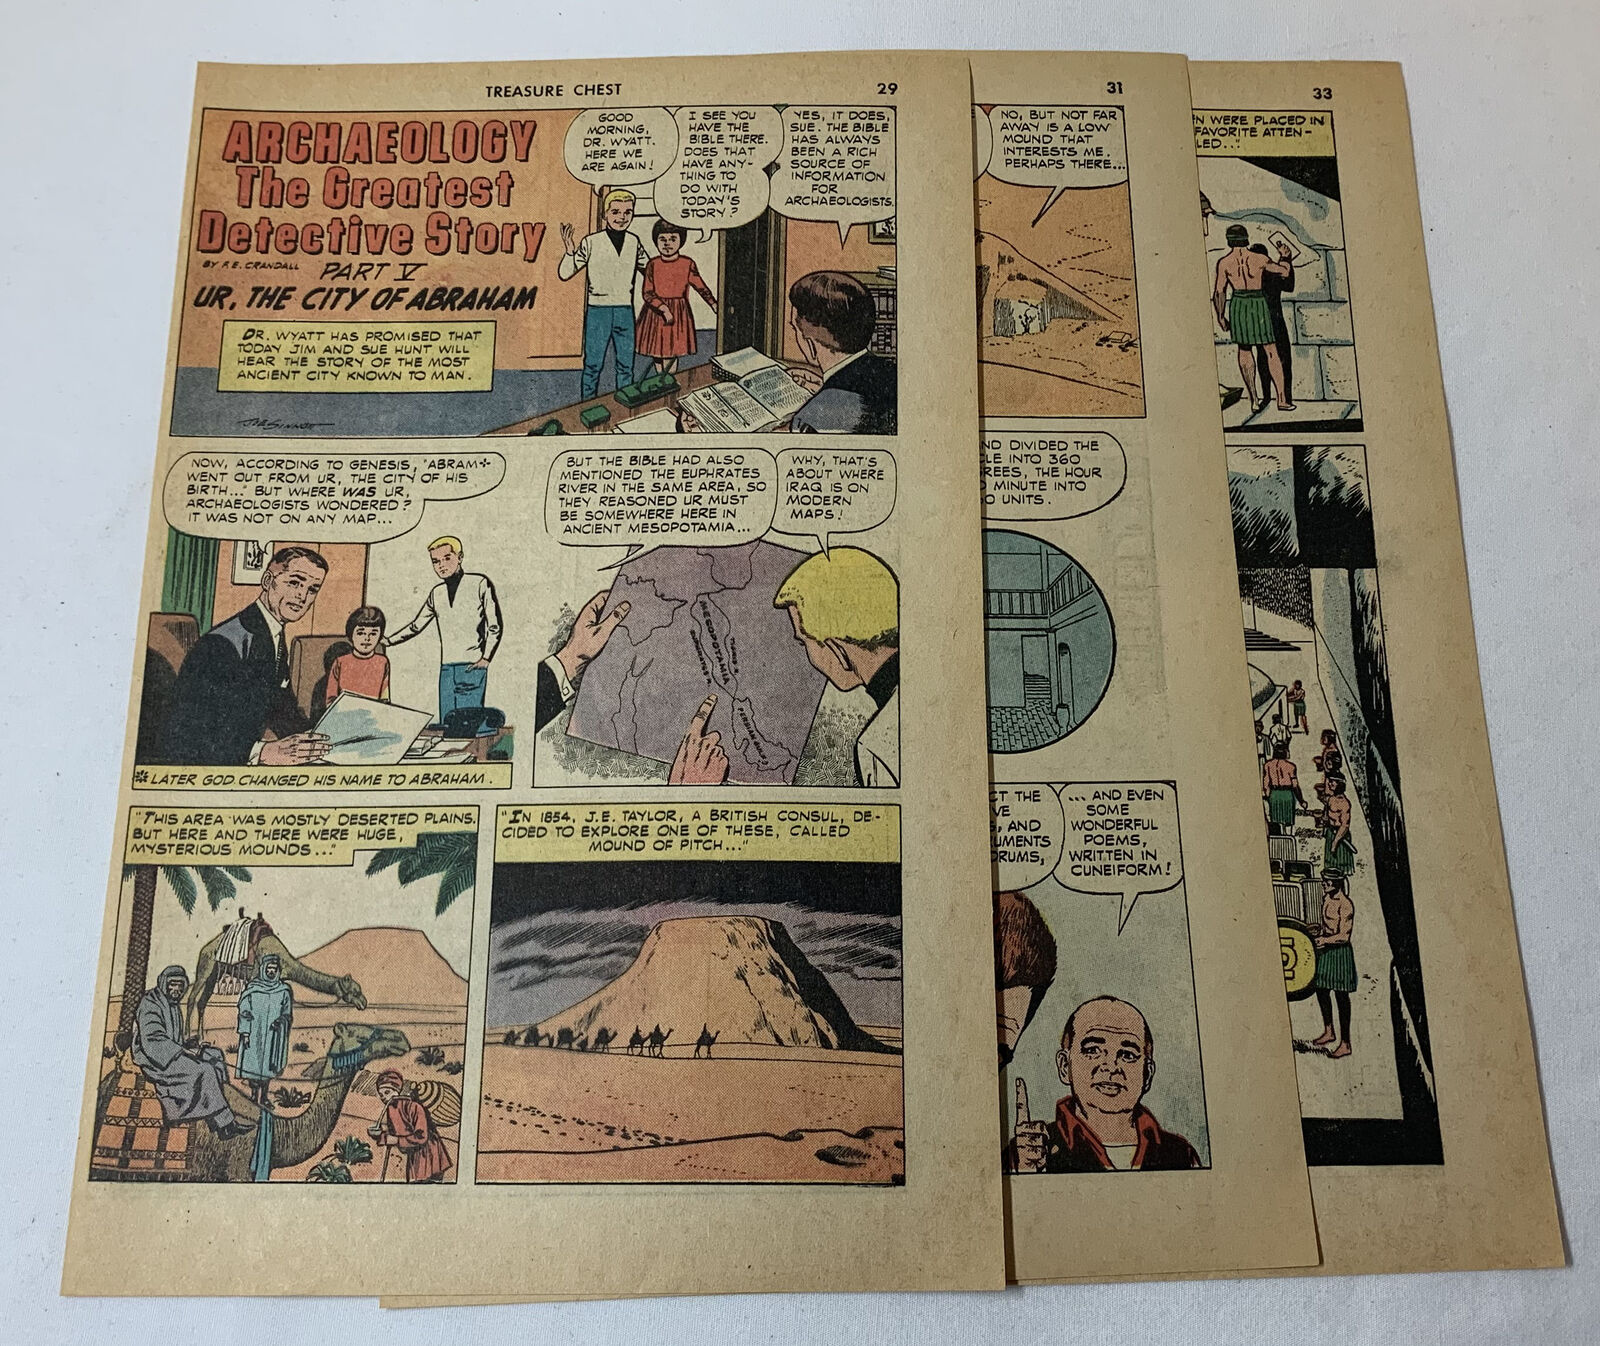 1966 six page cartoon story ~ ARCHAEOLOGY ~ UR THE CITY OF ABRAHAM